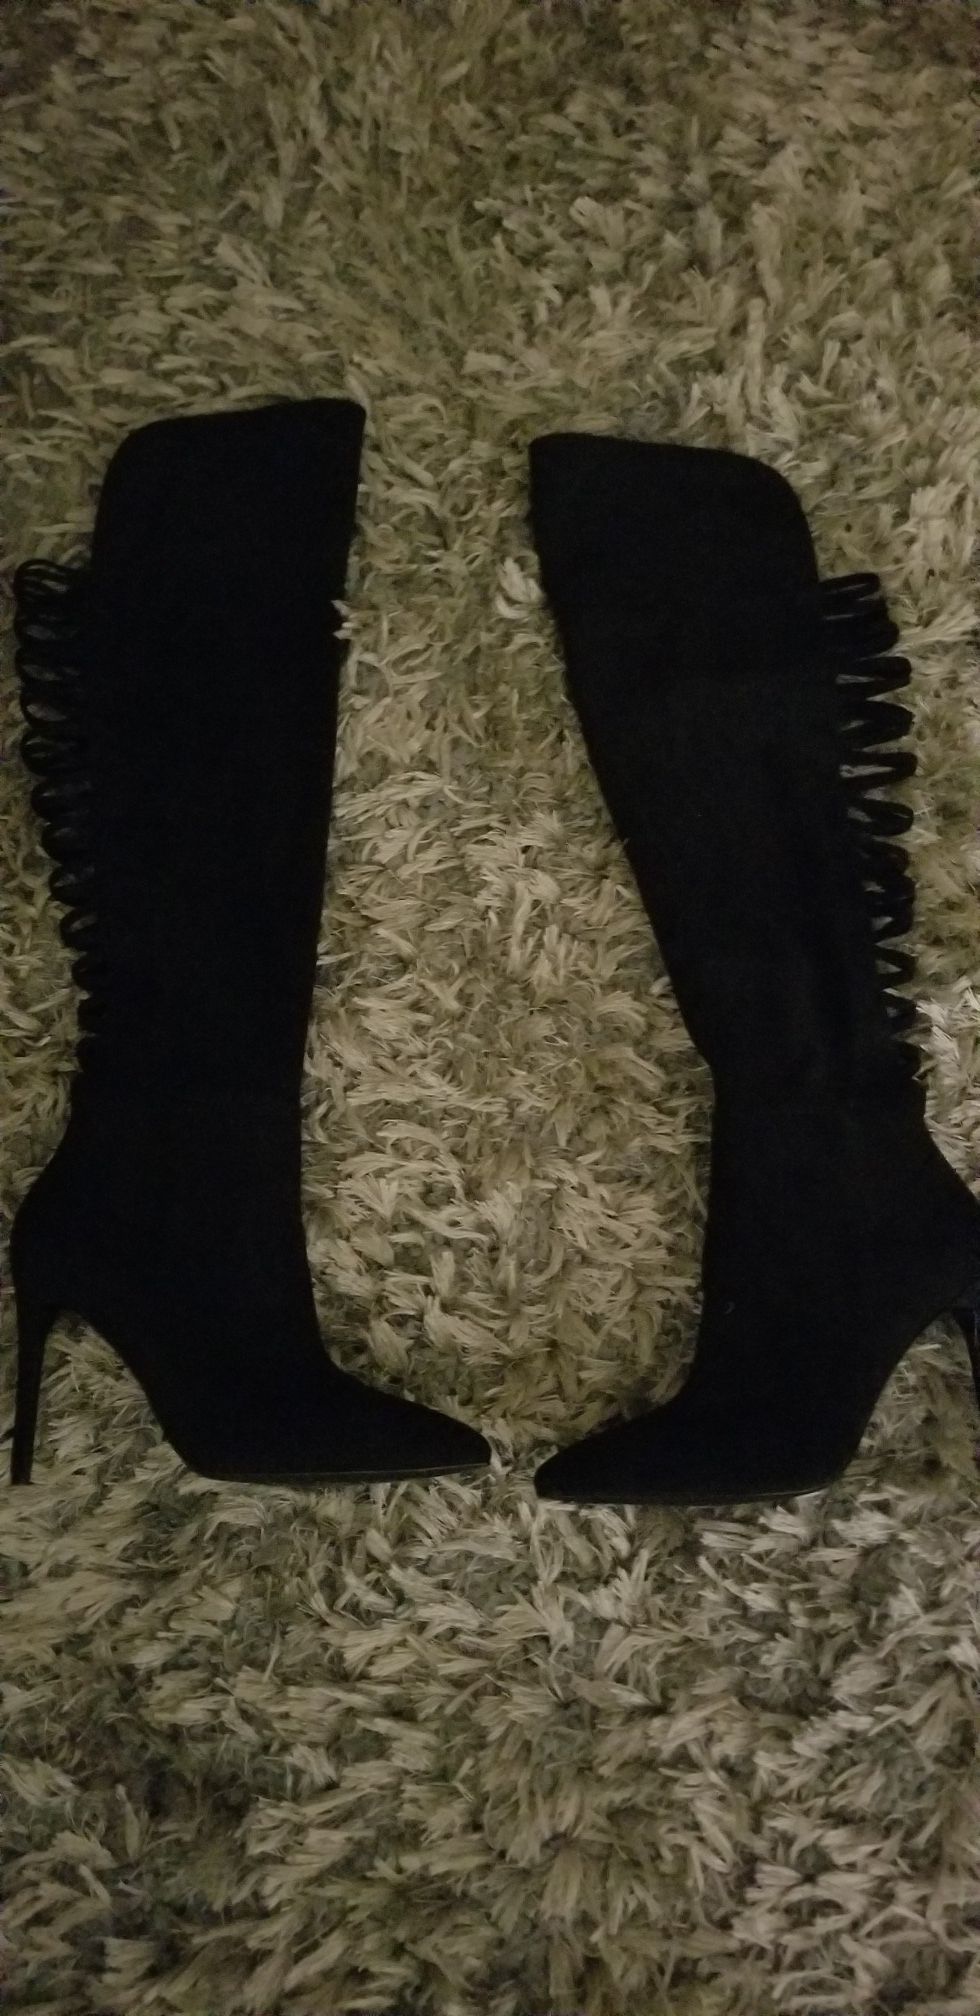 Brand New still in the box Black suede knee boots size 11 4in tall